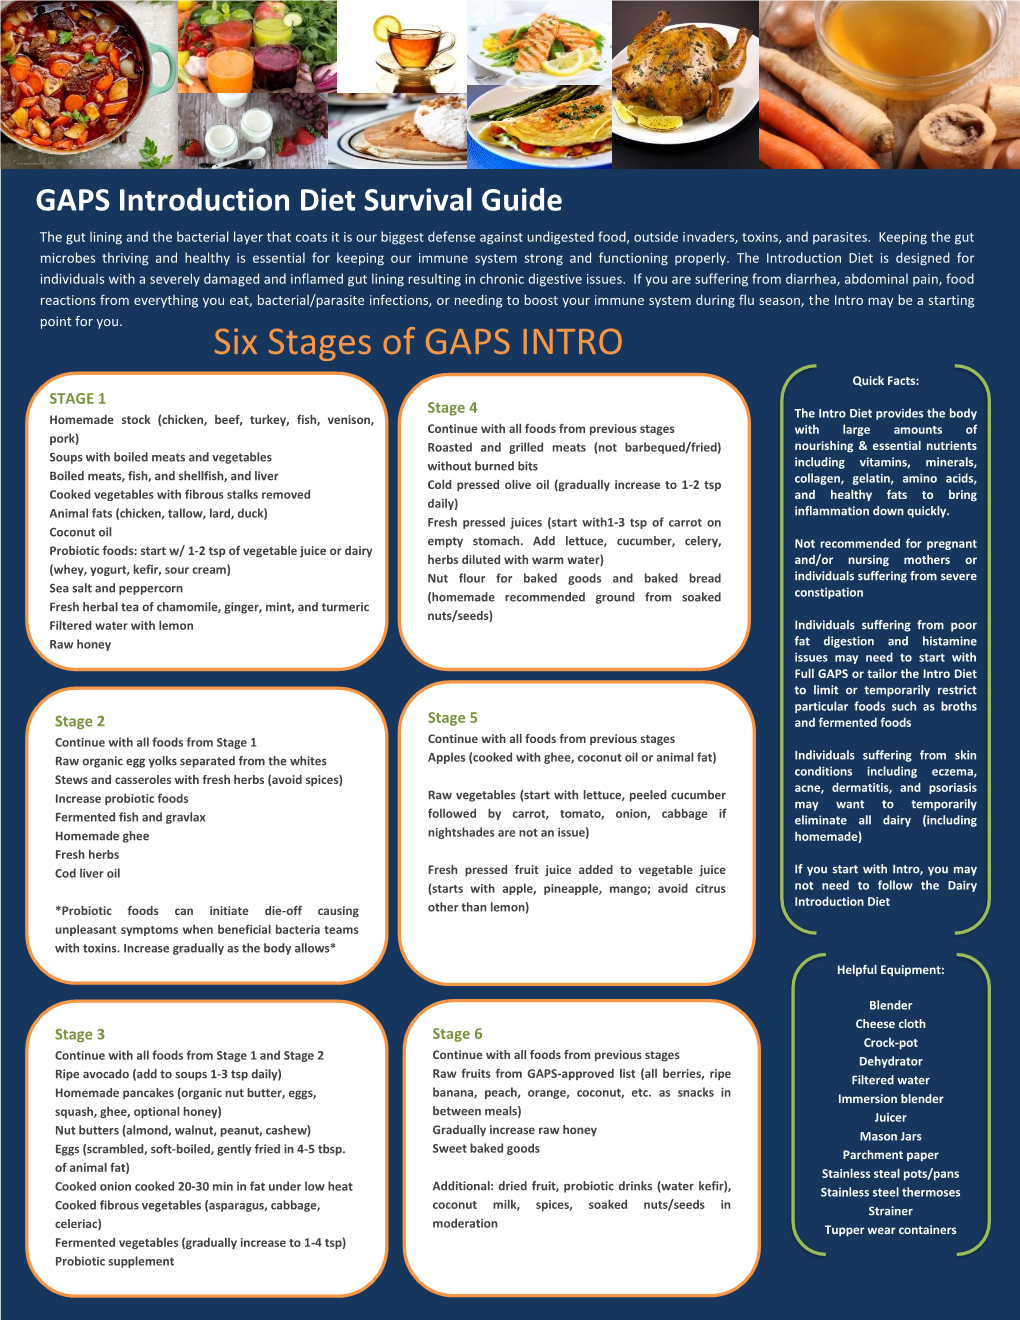 Six Stages of GAPS INTRO